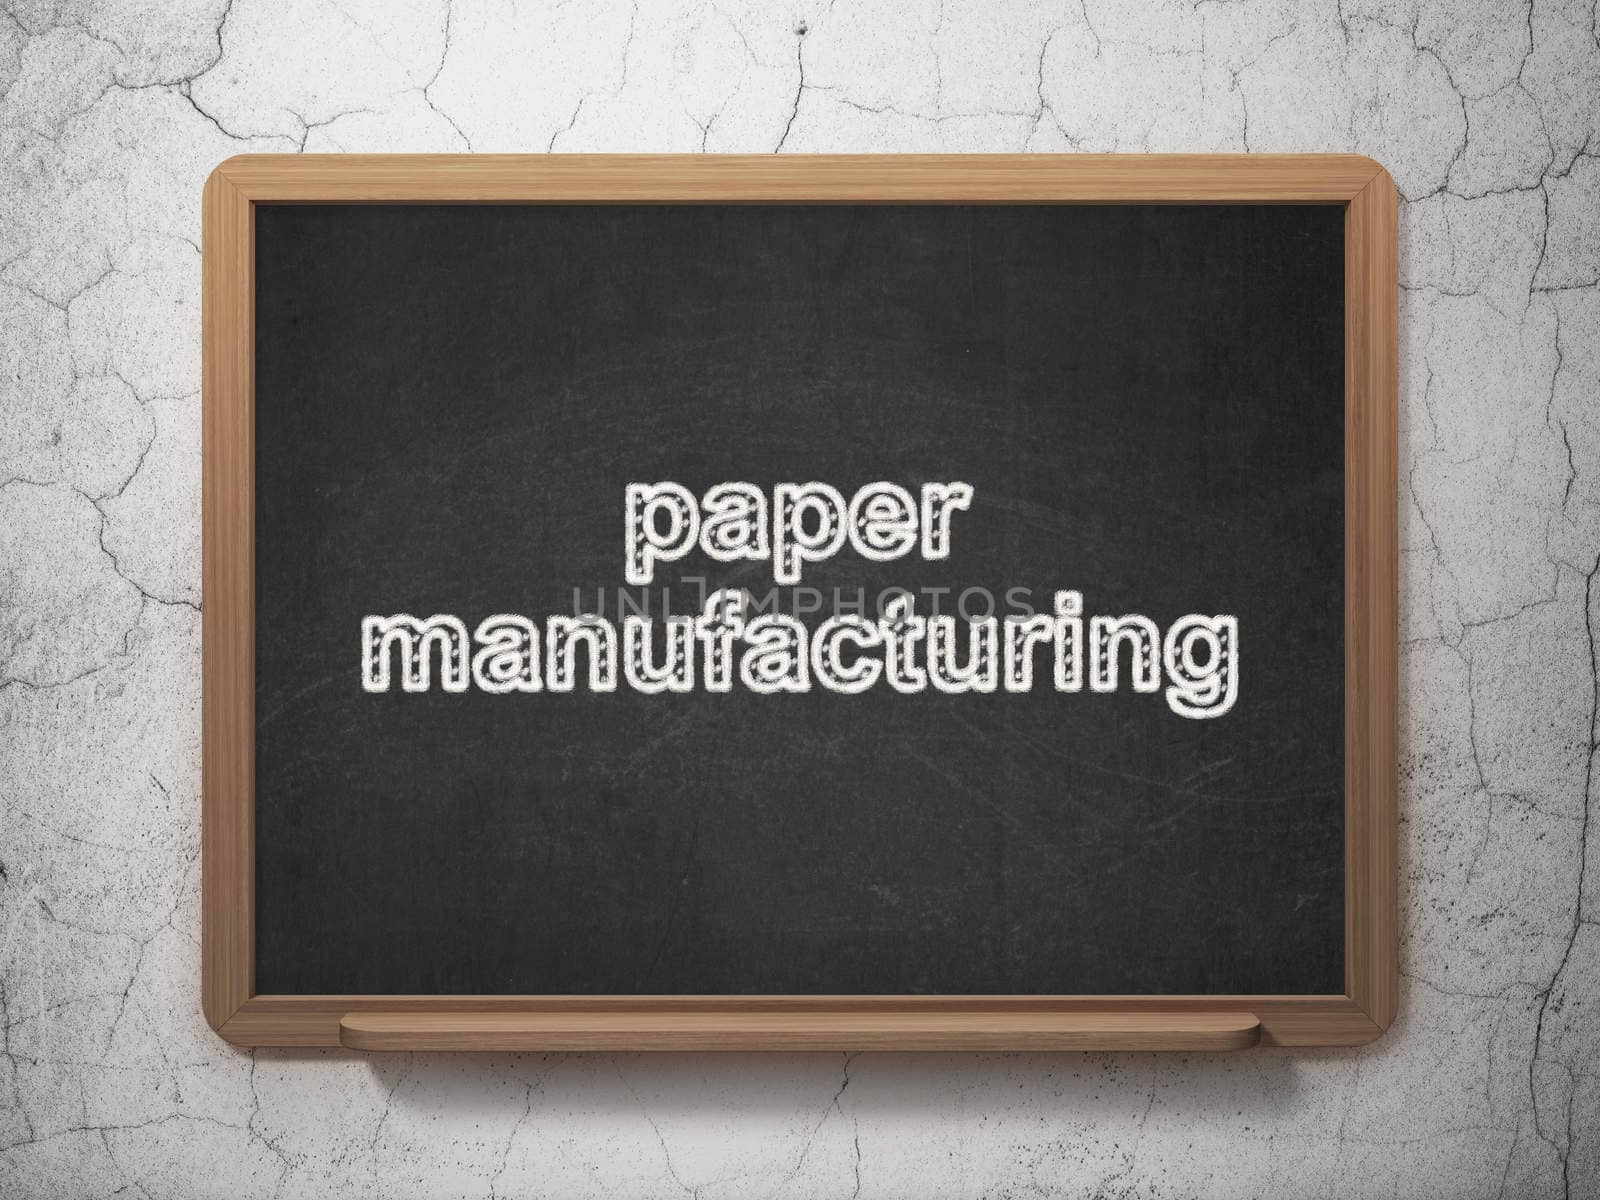 Manufacuring concept: Paper Manufacturing on chalkboard background by maxkabakov